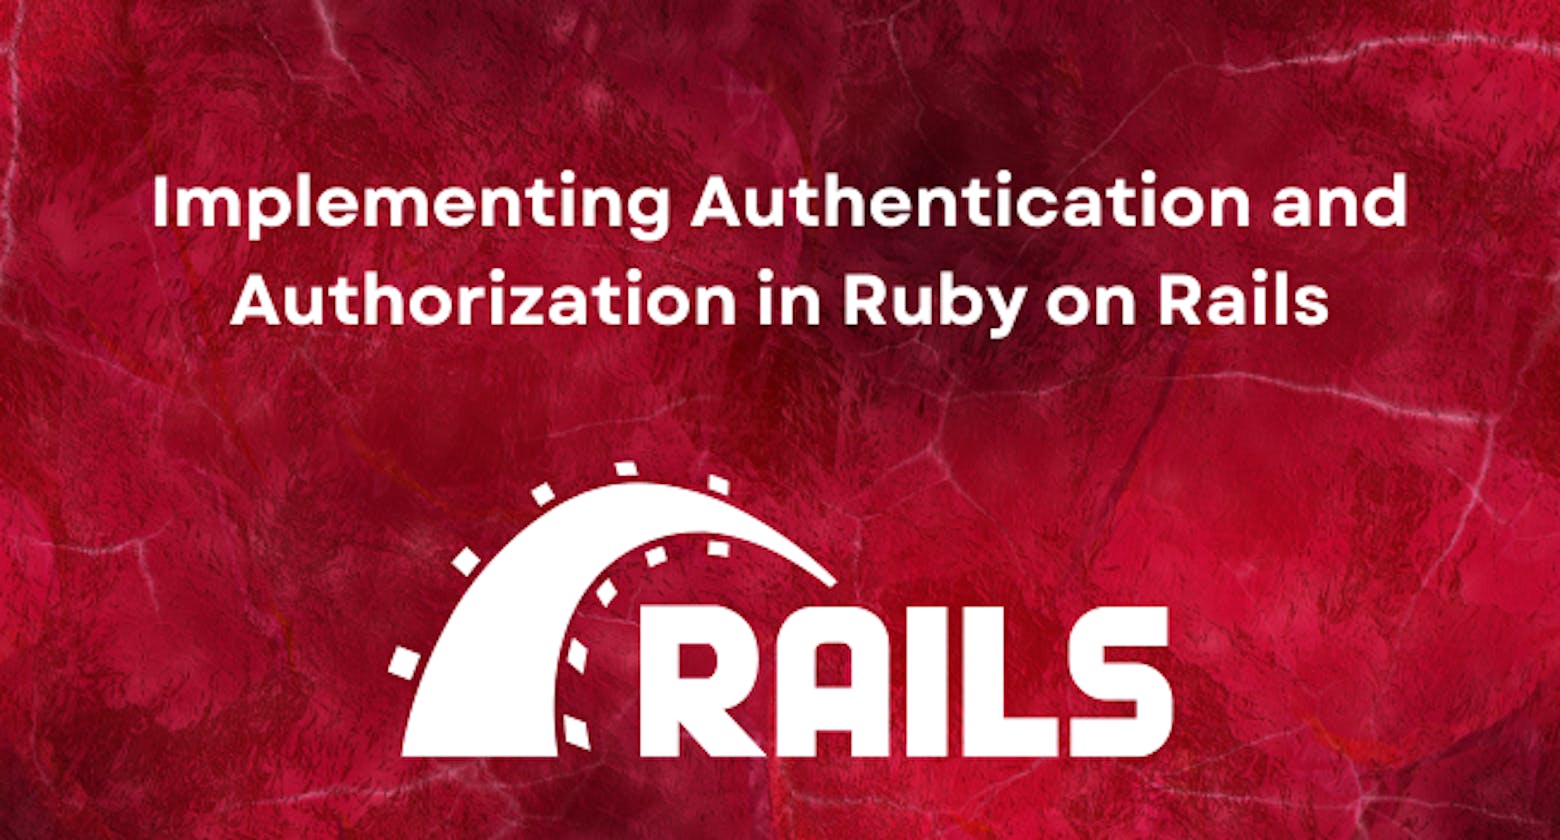 Implementing Authentication and Authorization in Ruby on Rails